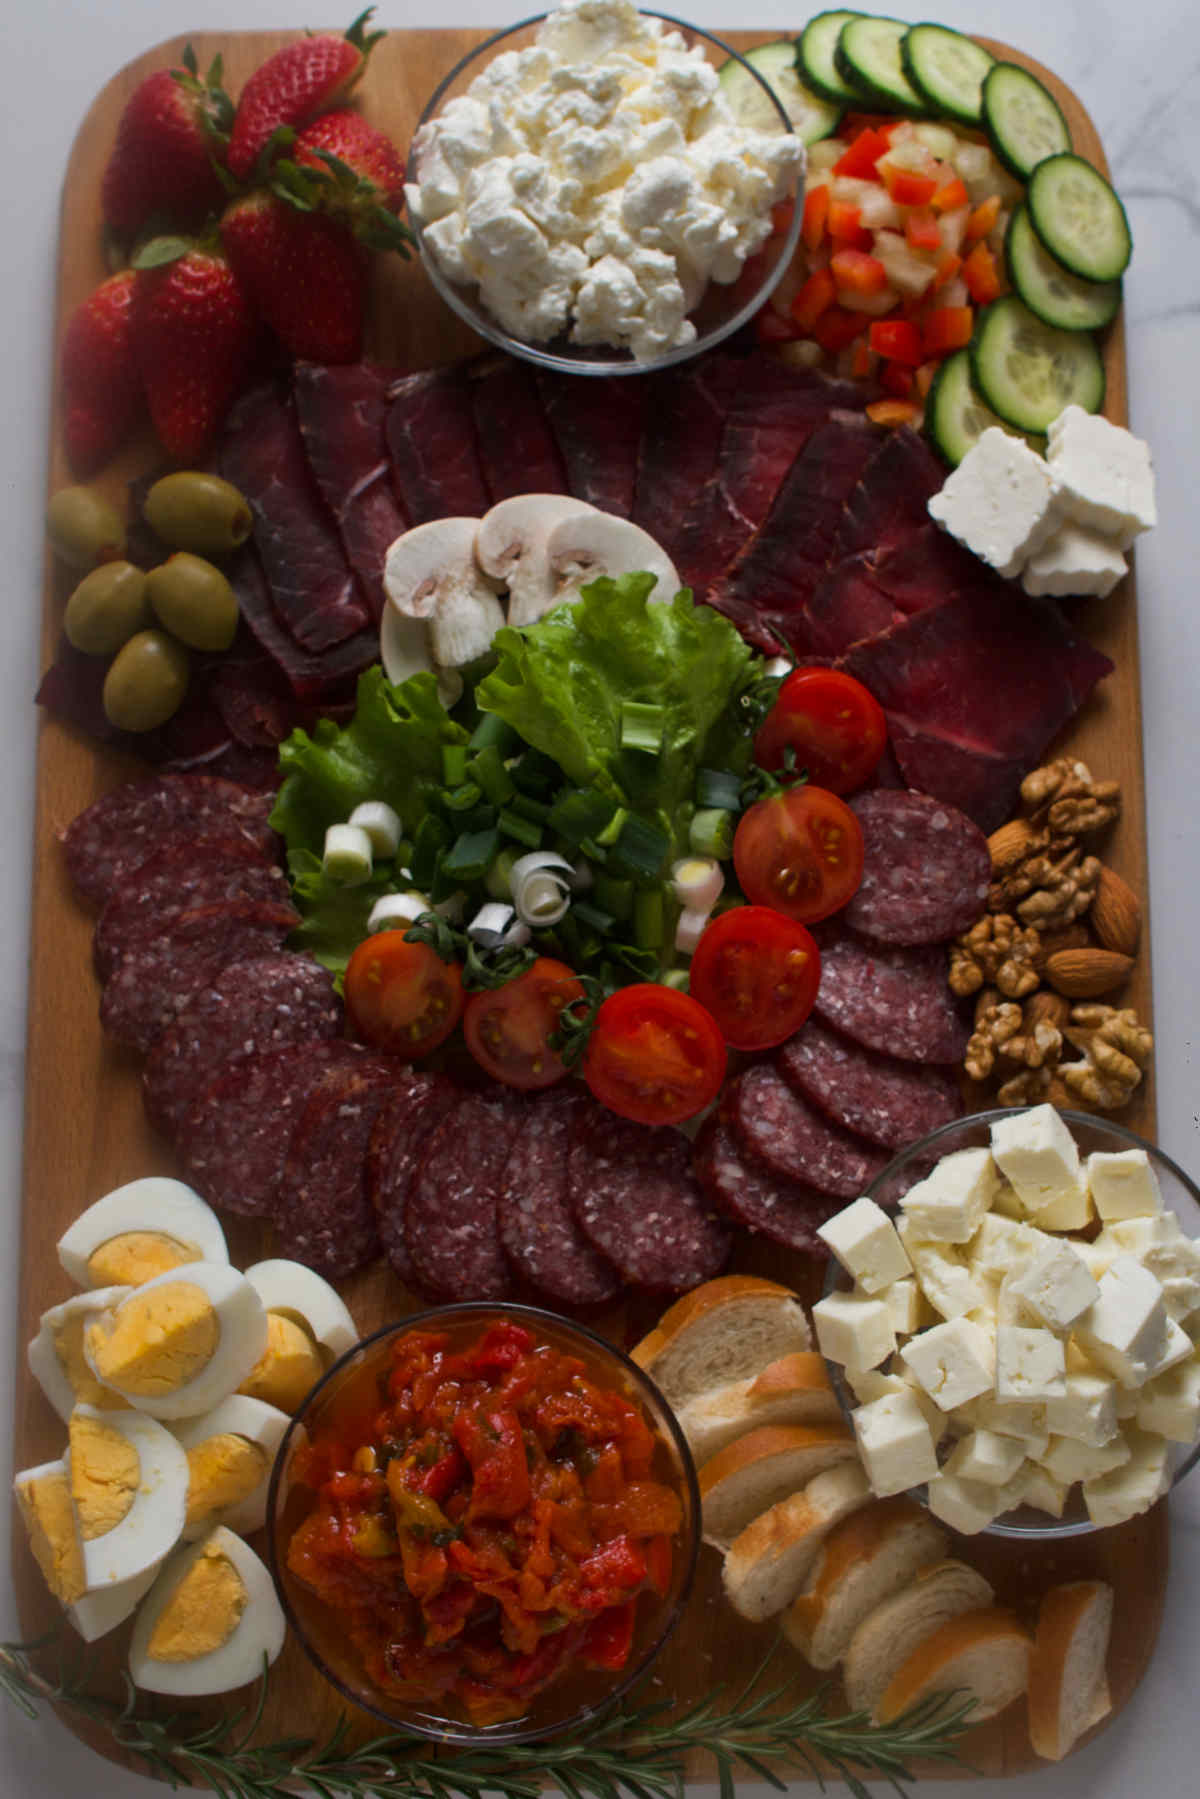 Rectangular wooden tray filled with different meats, cheeses, vegetables and nuts on a gray background. 